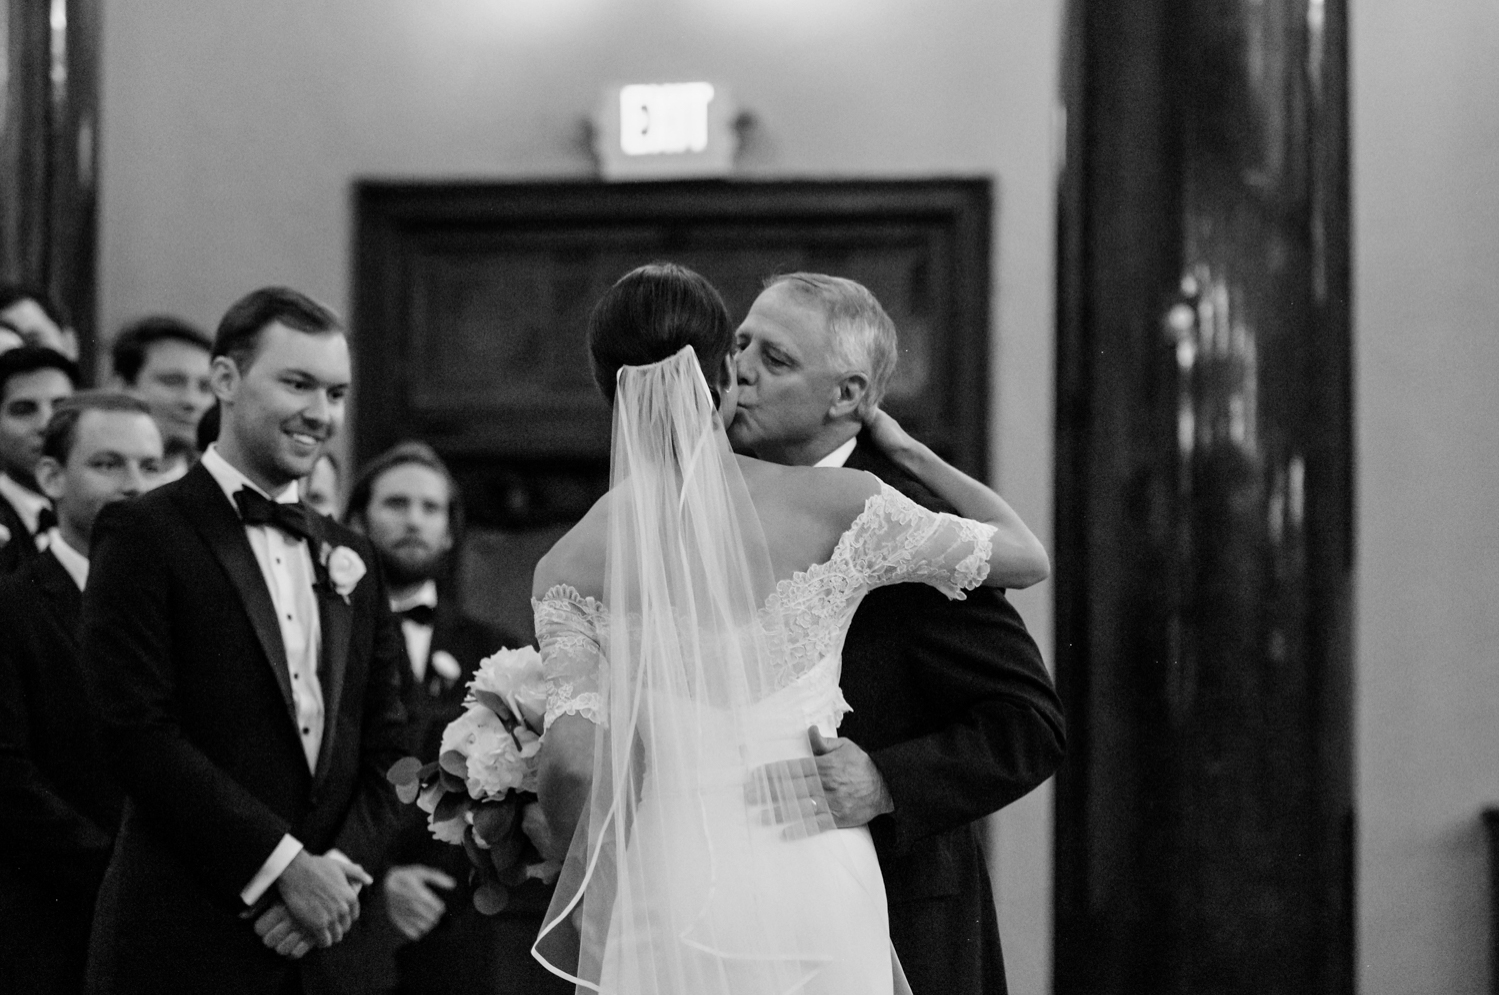 The father of the bride kisses her on the cheek before parting ways at the altar.